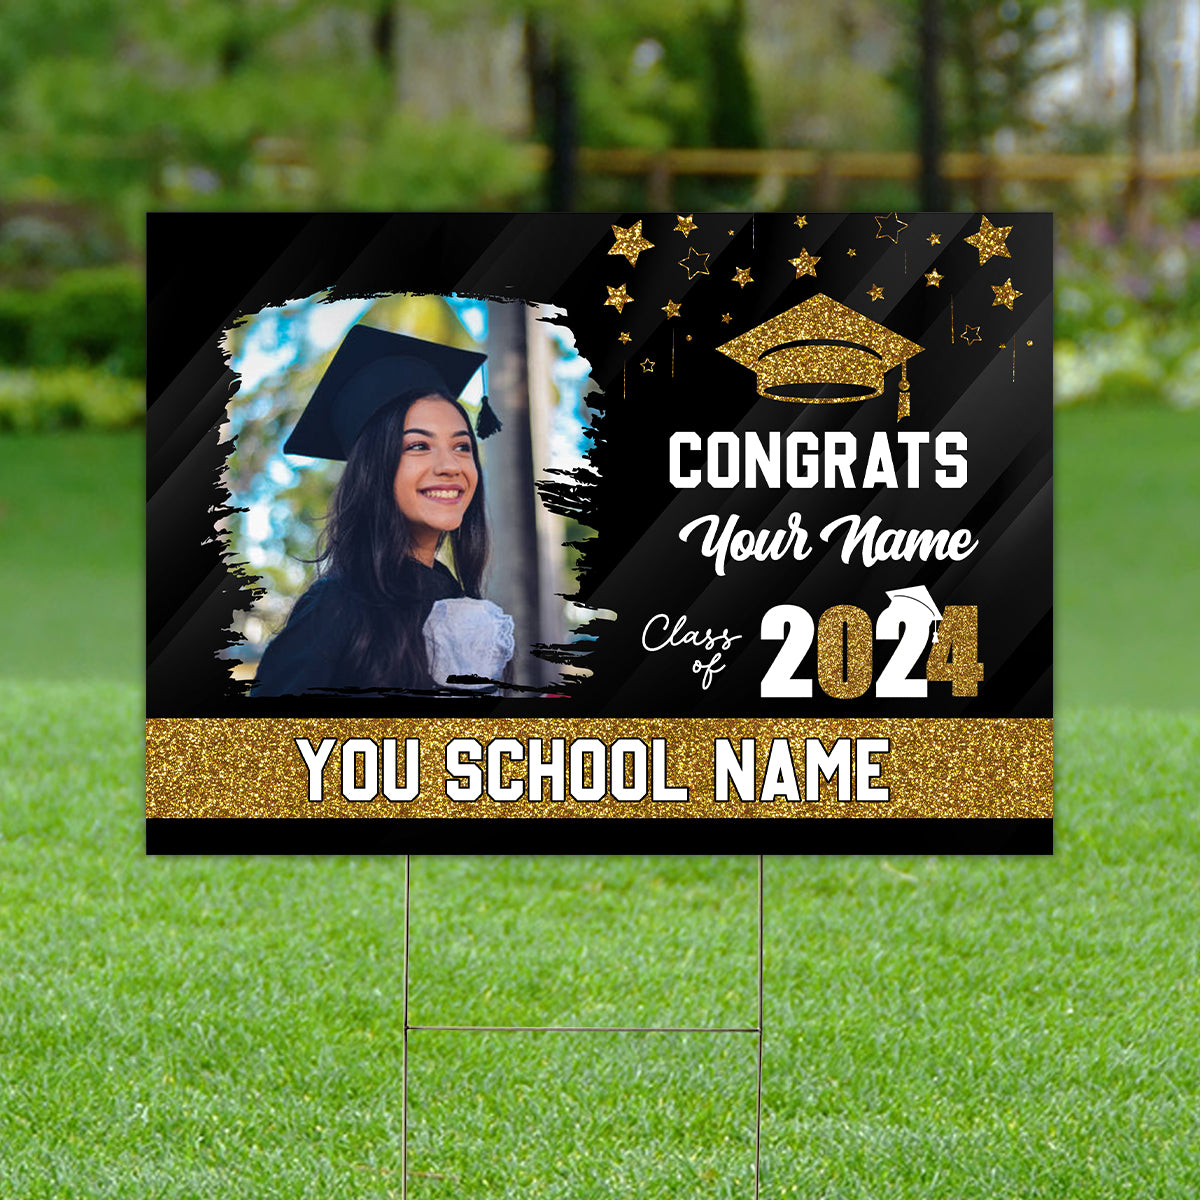 Congrats Class Of 2024, Custom School Name, Your Name And Photo, Personalized Lawn Sign, Yard Sign, Gift For Graduation